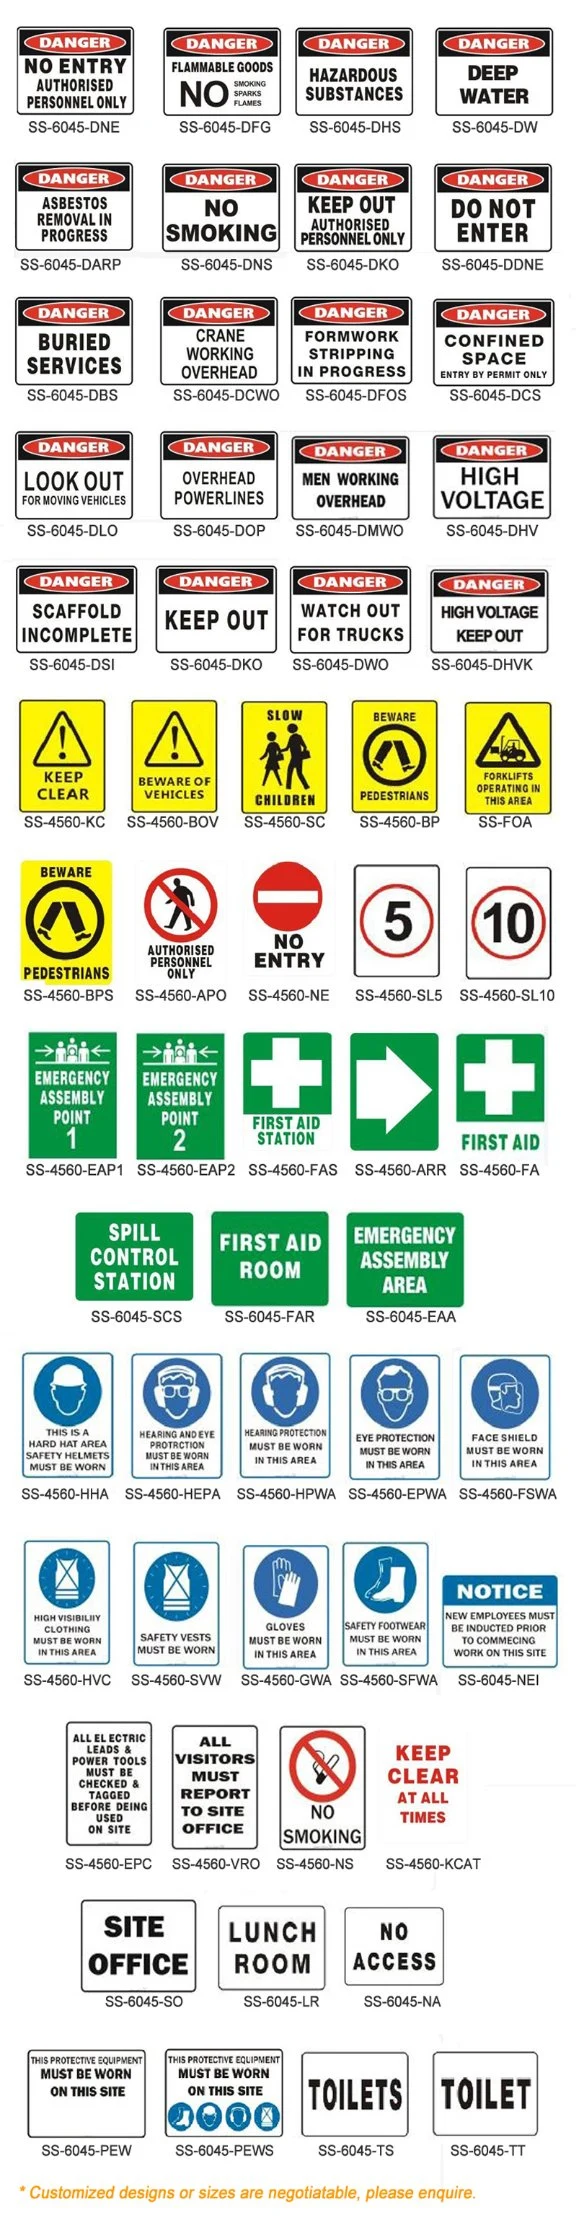 Made in China Plastic PP Free Hazard Health Warning and General Safety Signs in The Workplace